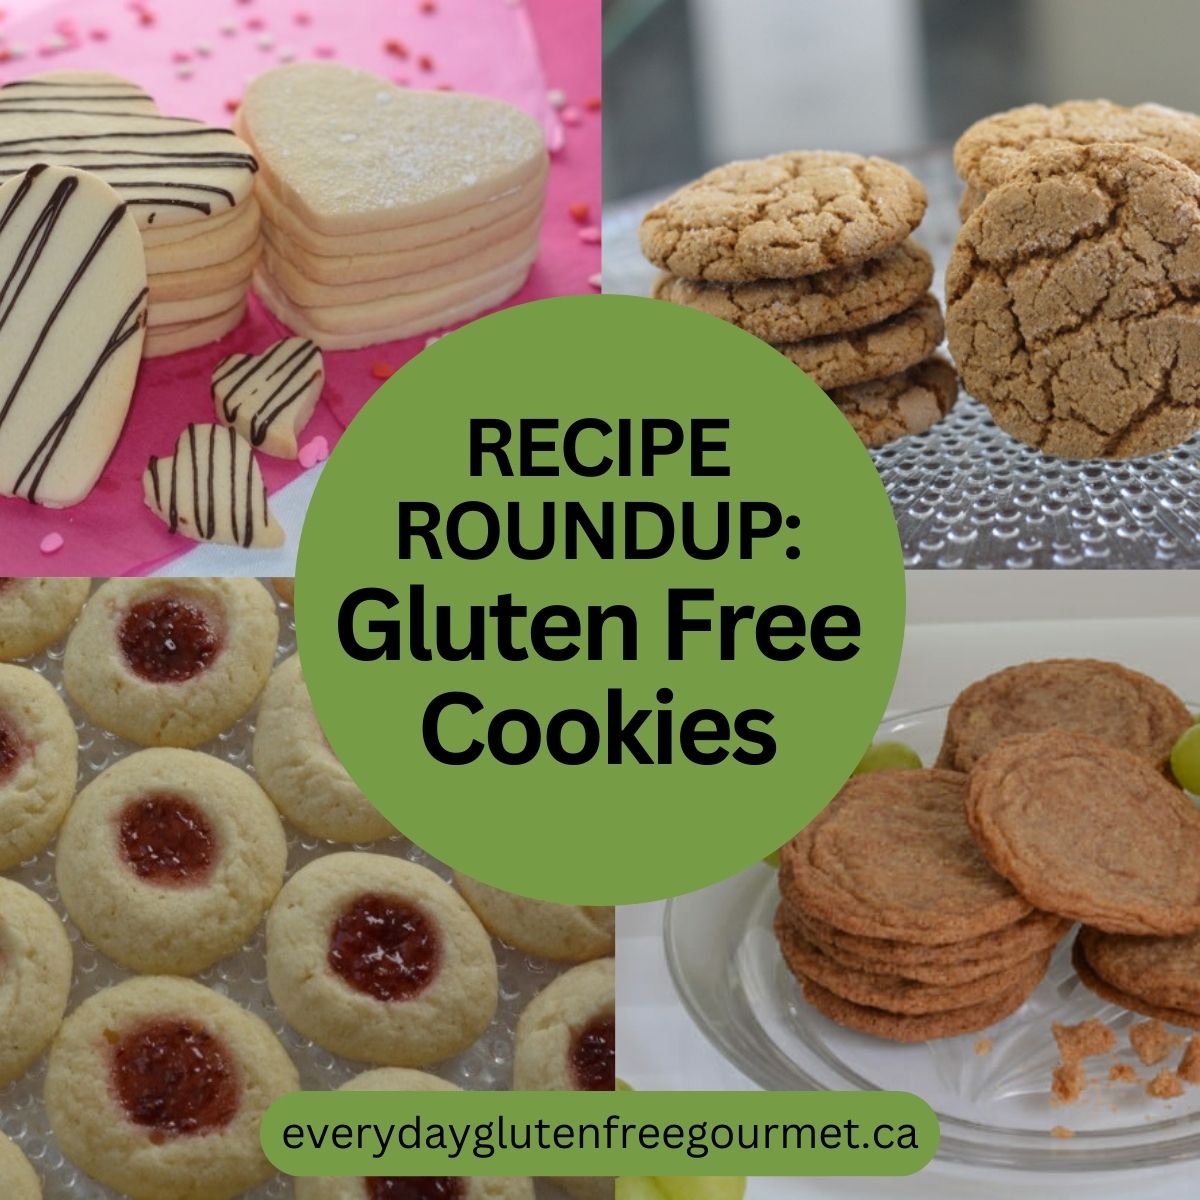 Four Gluten Free Cookies; sugar cookies, molasses ginger cookies, thumbprint cookies and snickerdoodles.